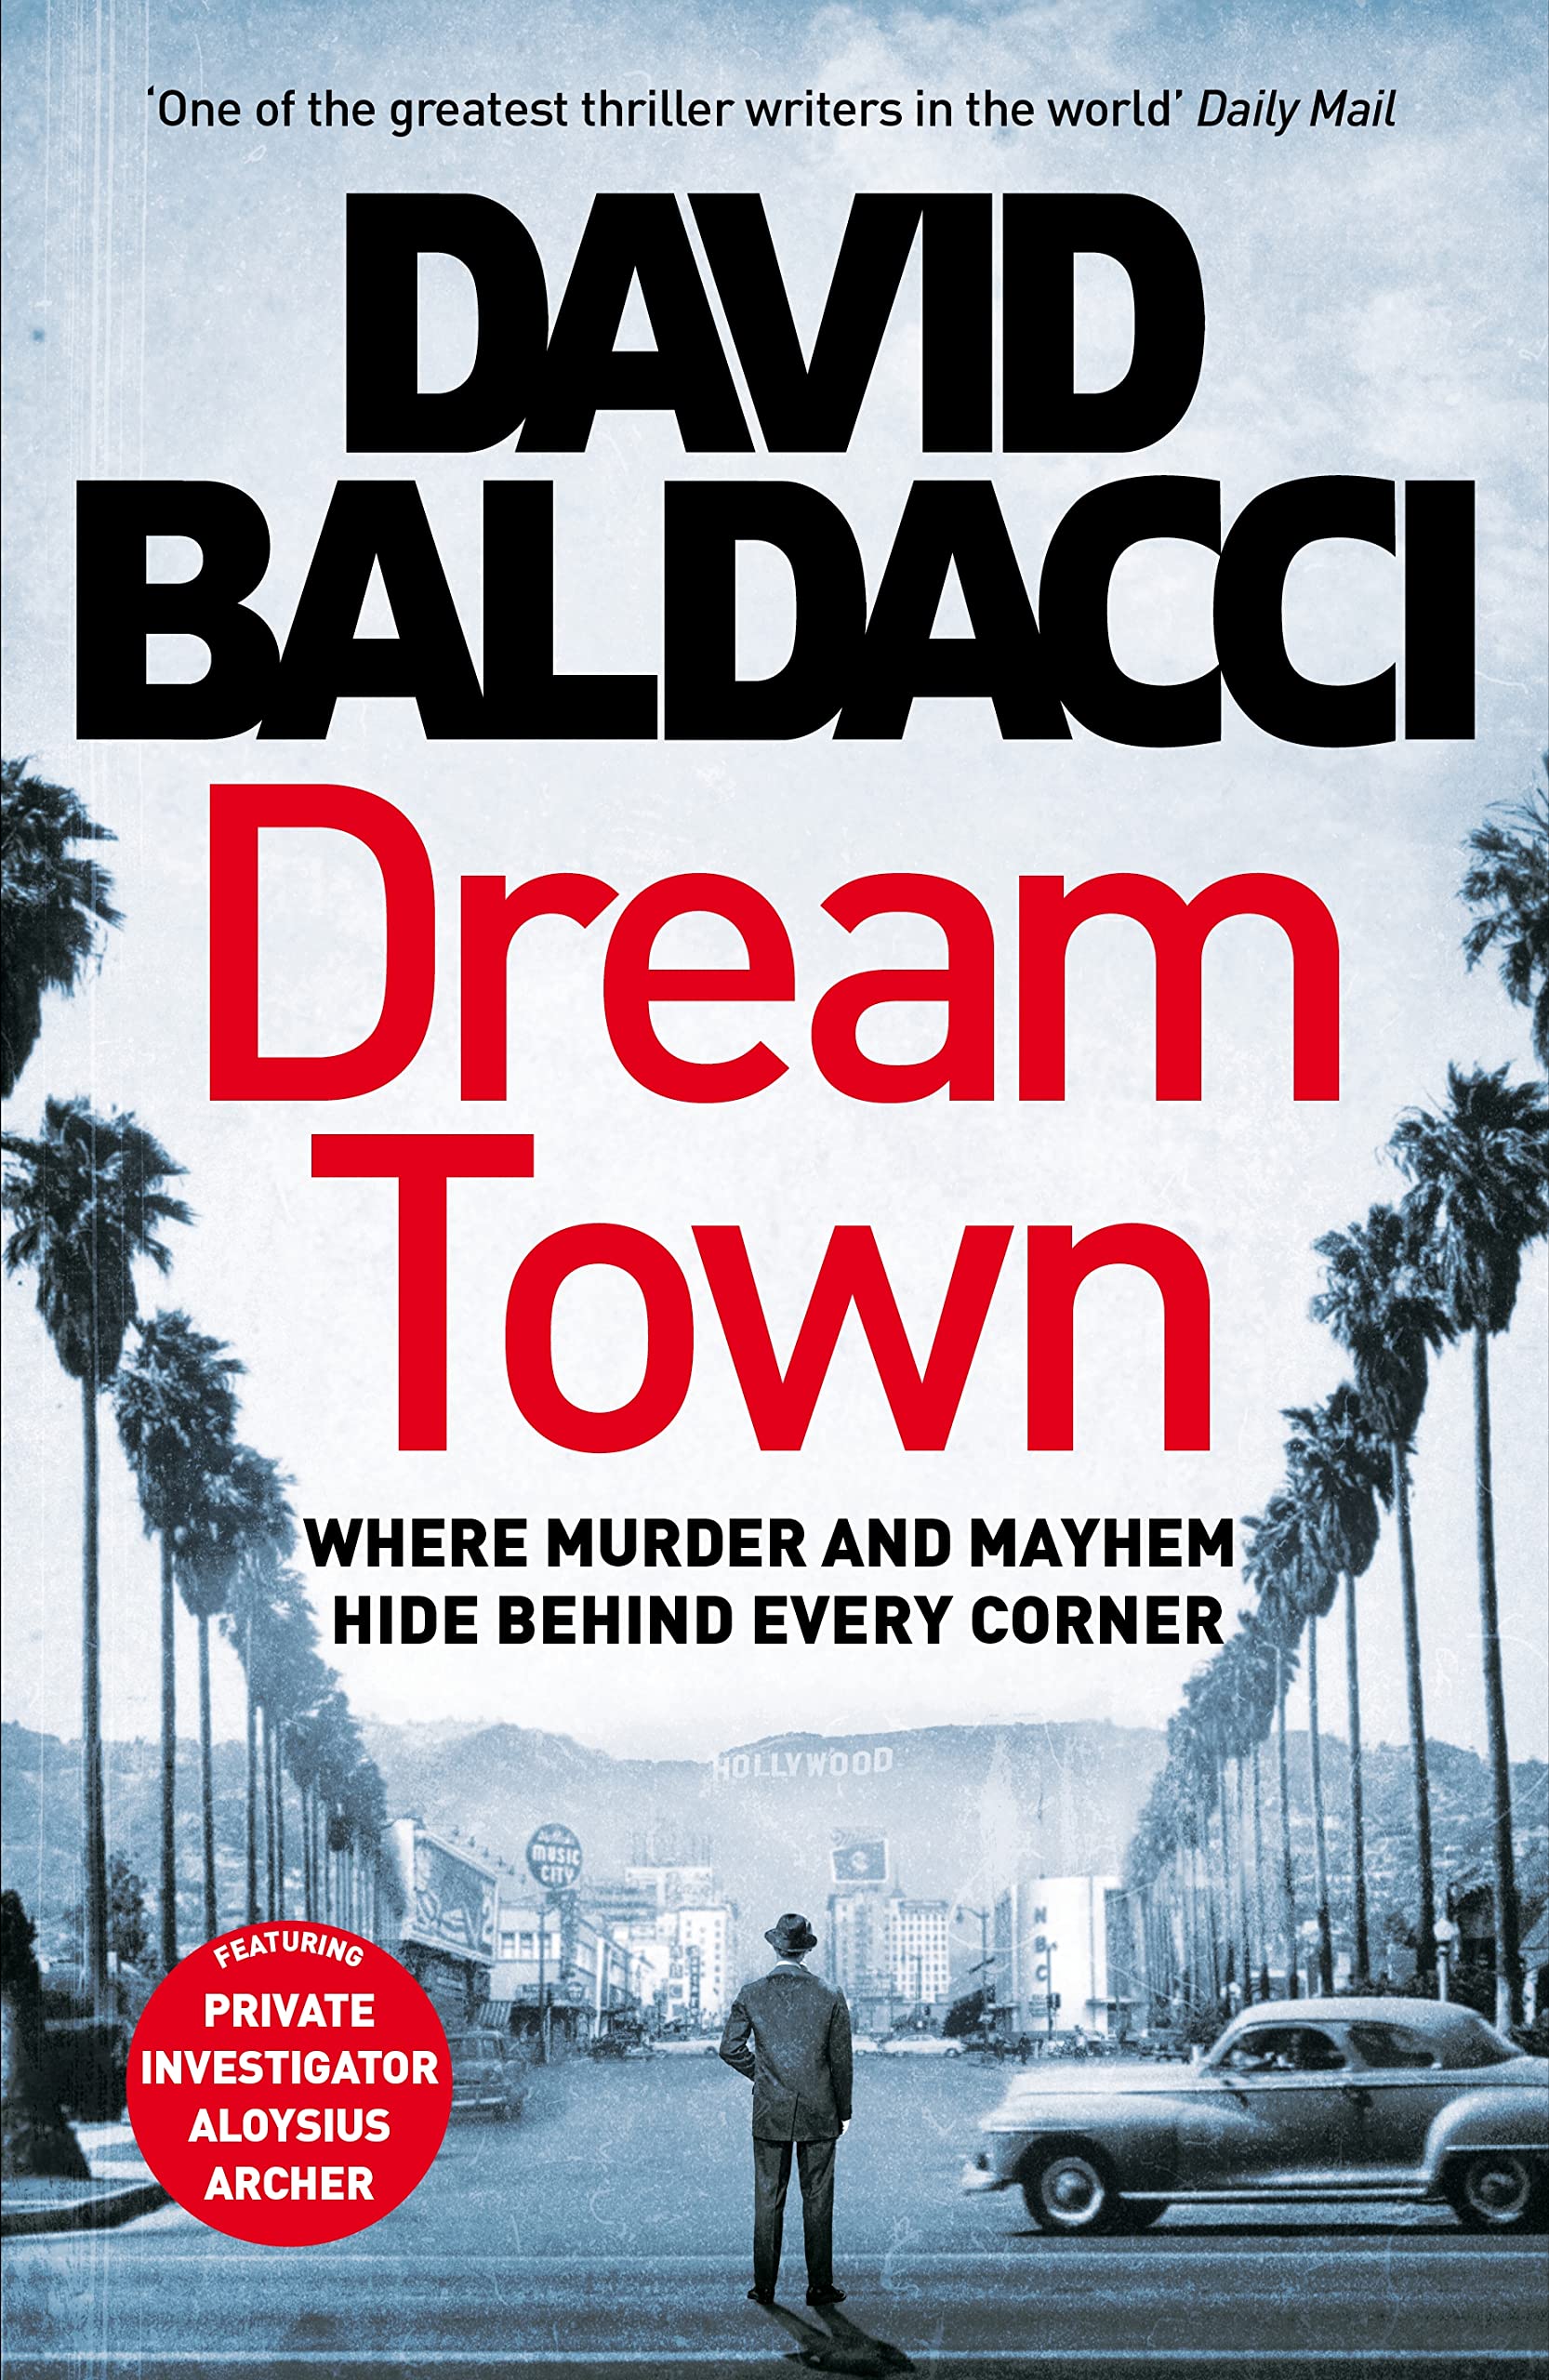 Apple Books Bestsellers Baldacci's 'Dream Town' Beats Out Steel's